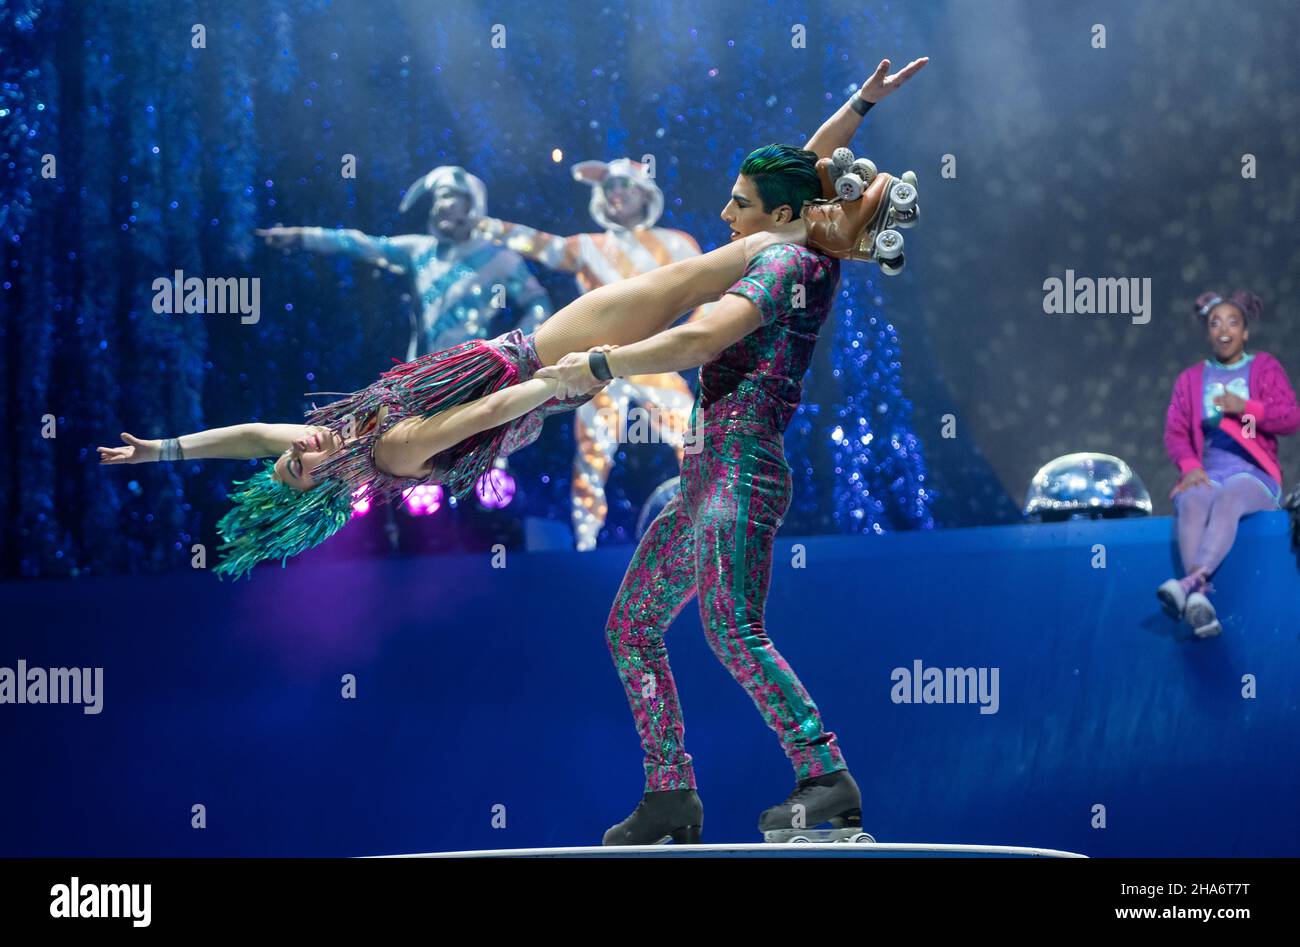 New York, NY - December 9, 2021: Holler Zavatta Bogino and Kimberly Zavatta Bogino perform Roller Skaters act during media dress rehearsal for ‘TWAS THE NIGHT BEFORE... by Cirque du Soleil at MSG Hulu Theater Stock Photo